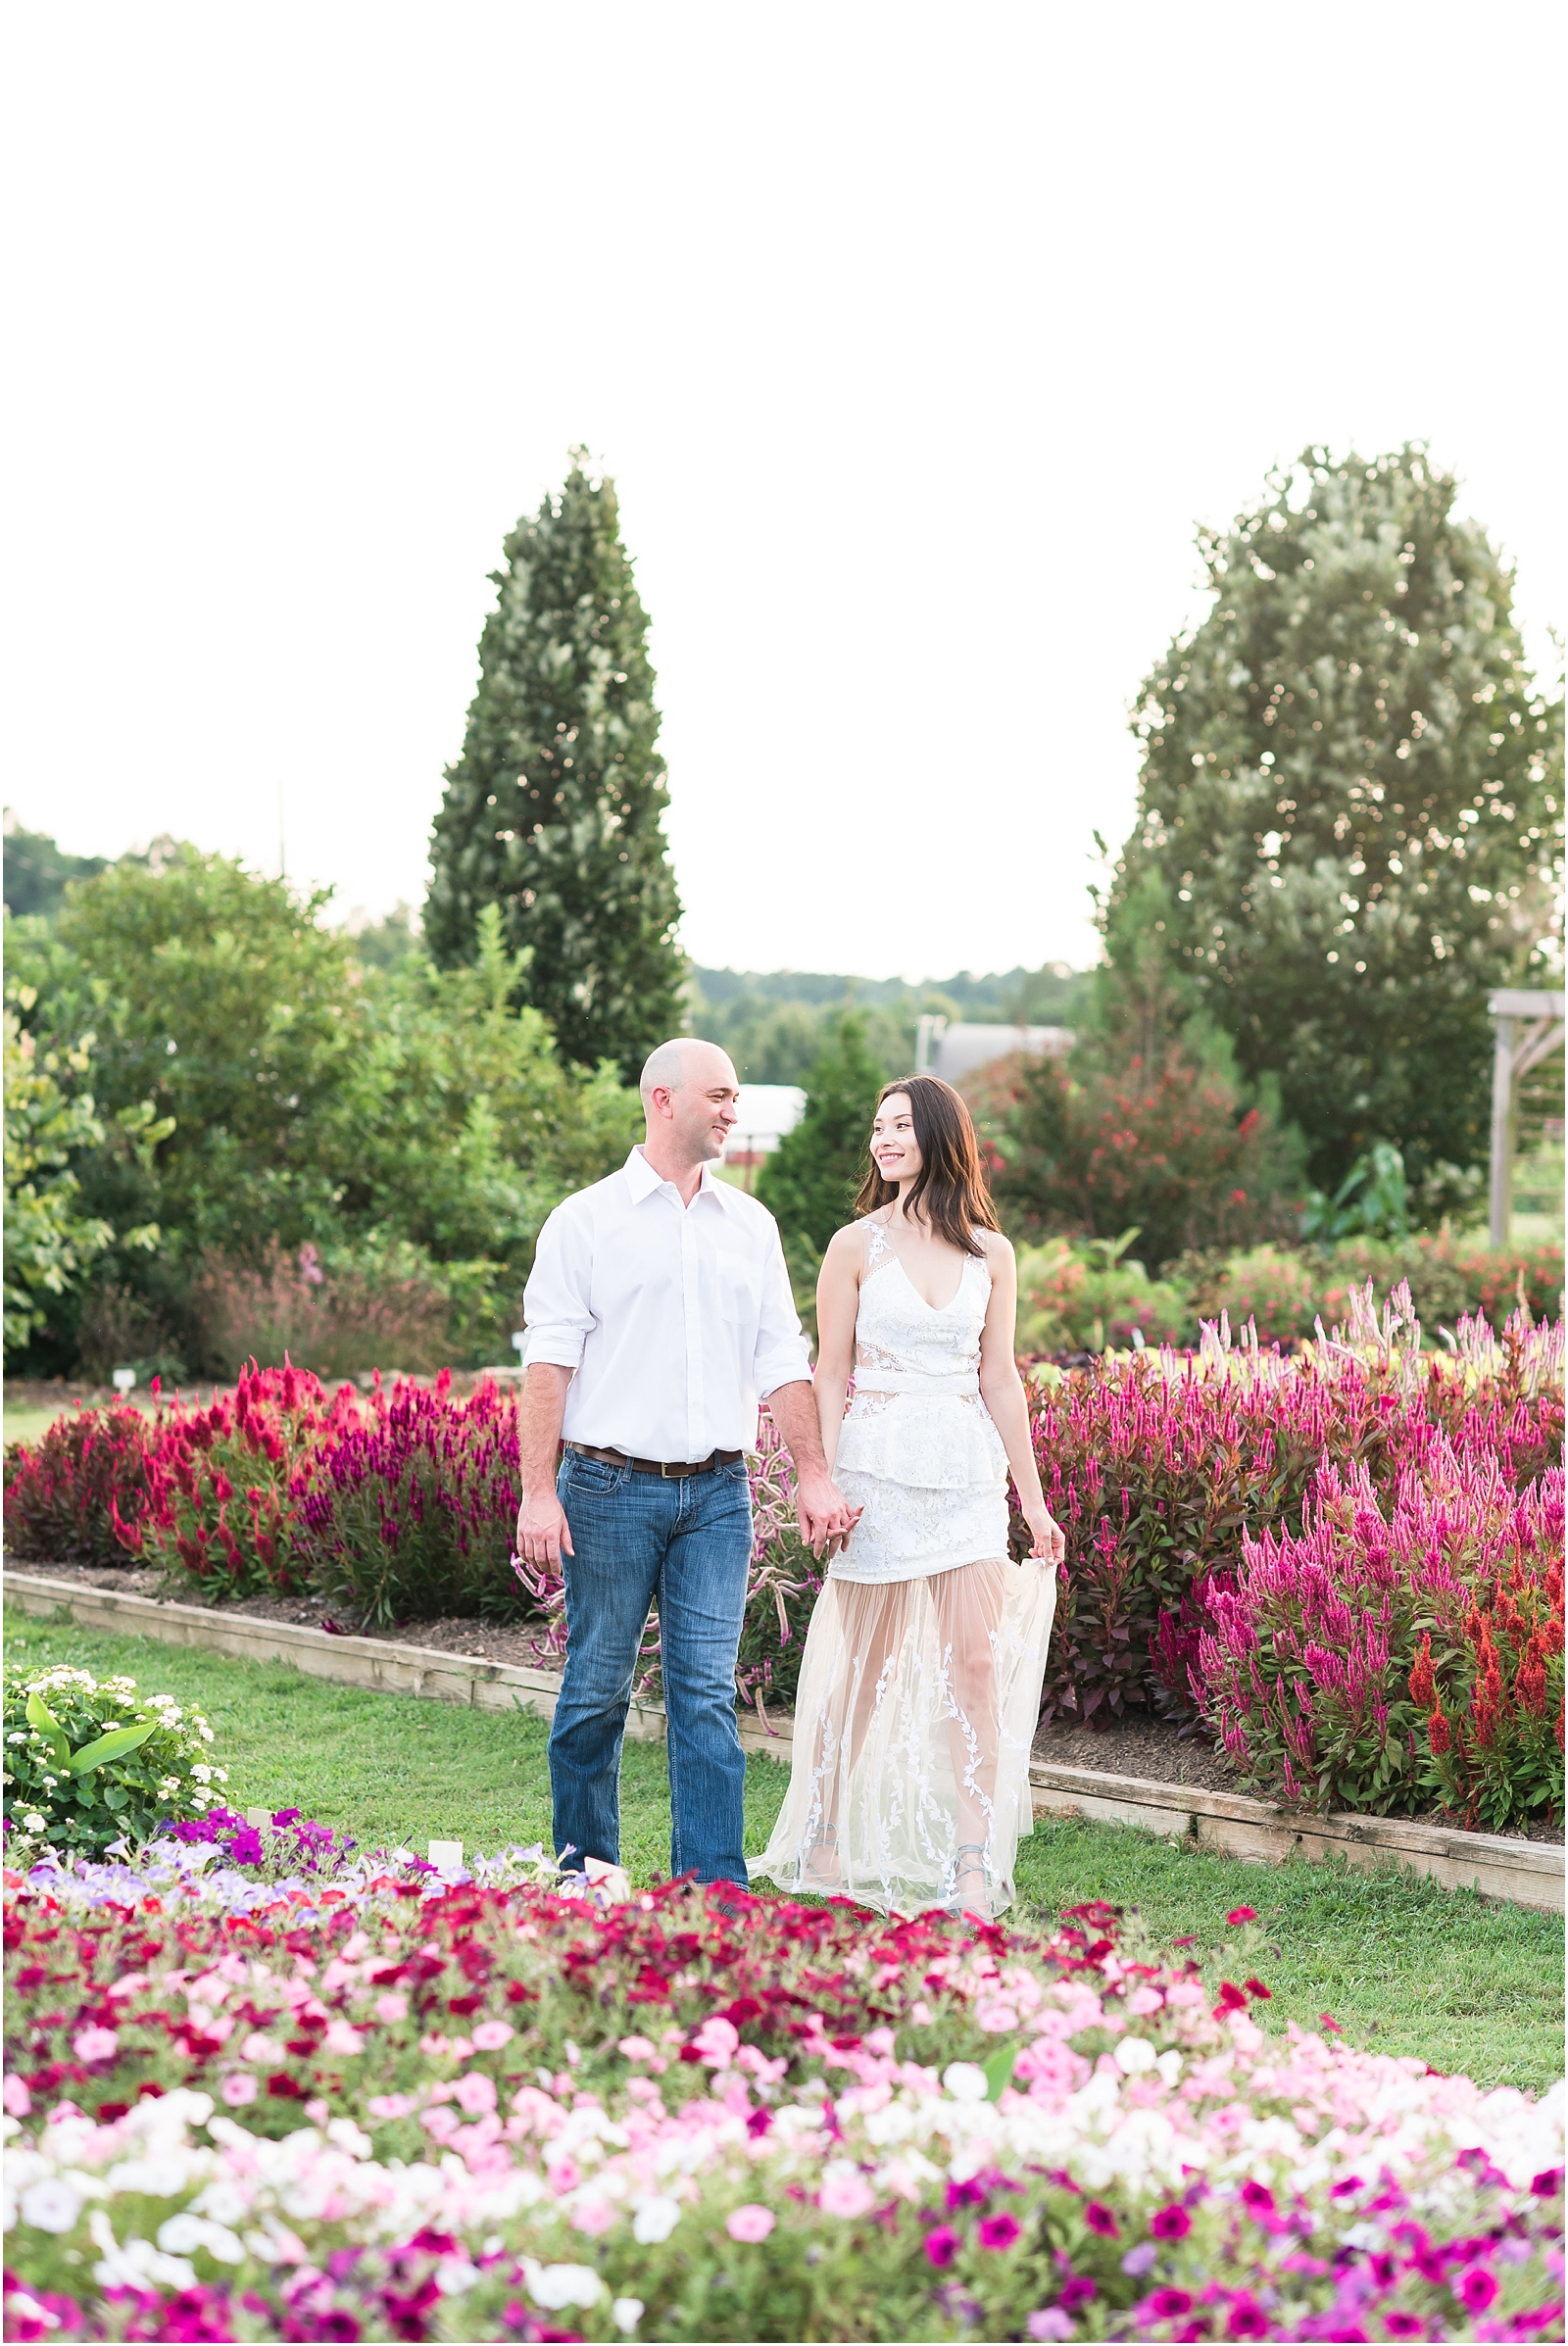 man wearing a white shirt and woman wearing a white dress walking hand in hand through a flower field at JC Raulston Arboretum